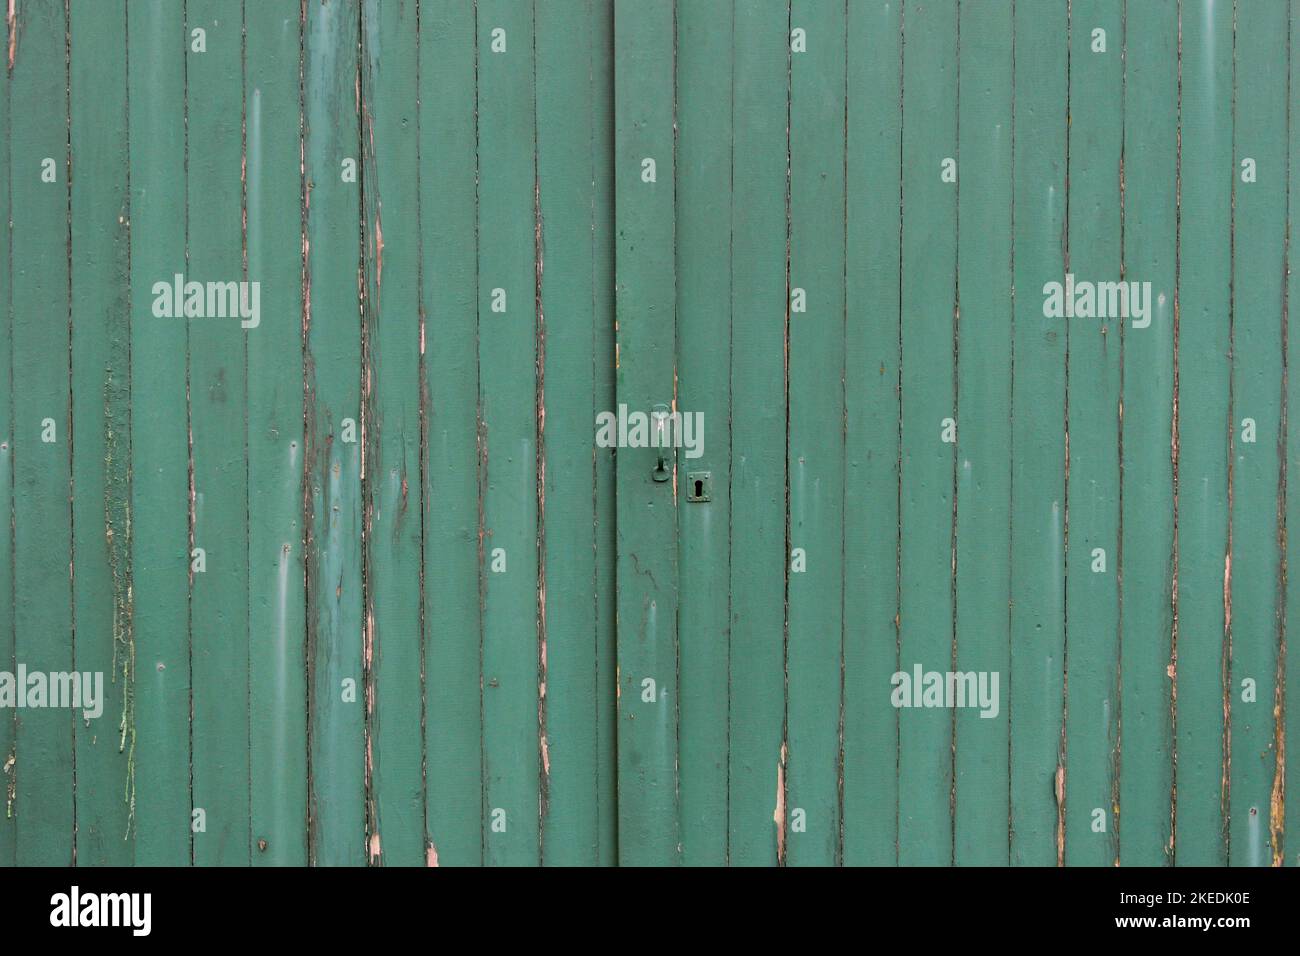 peeling wooden staves of a door – a texture Stock Photo